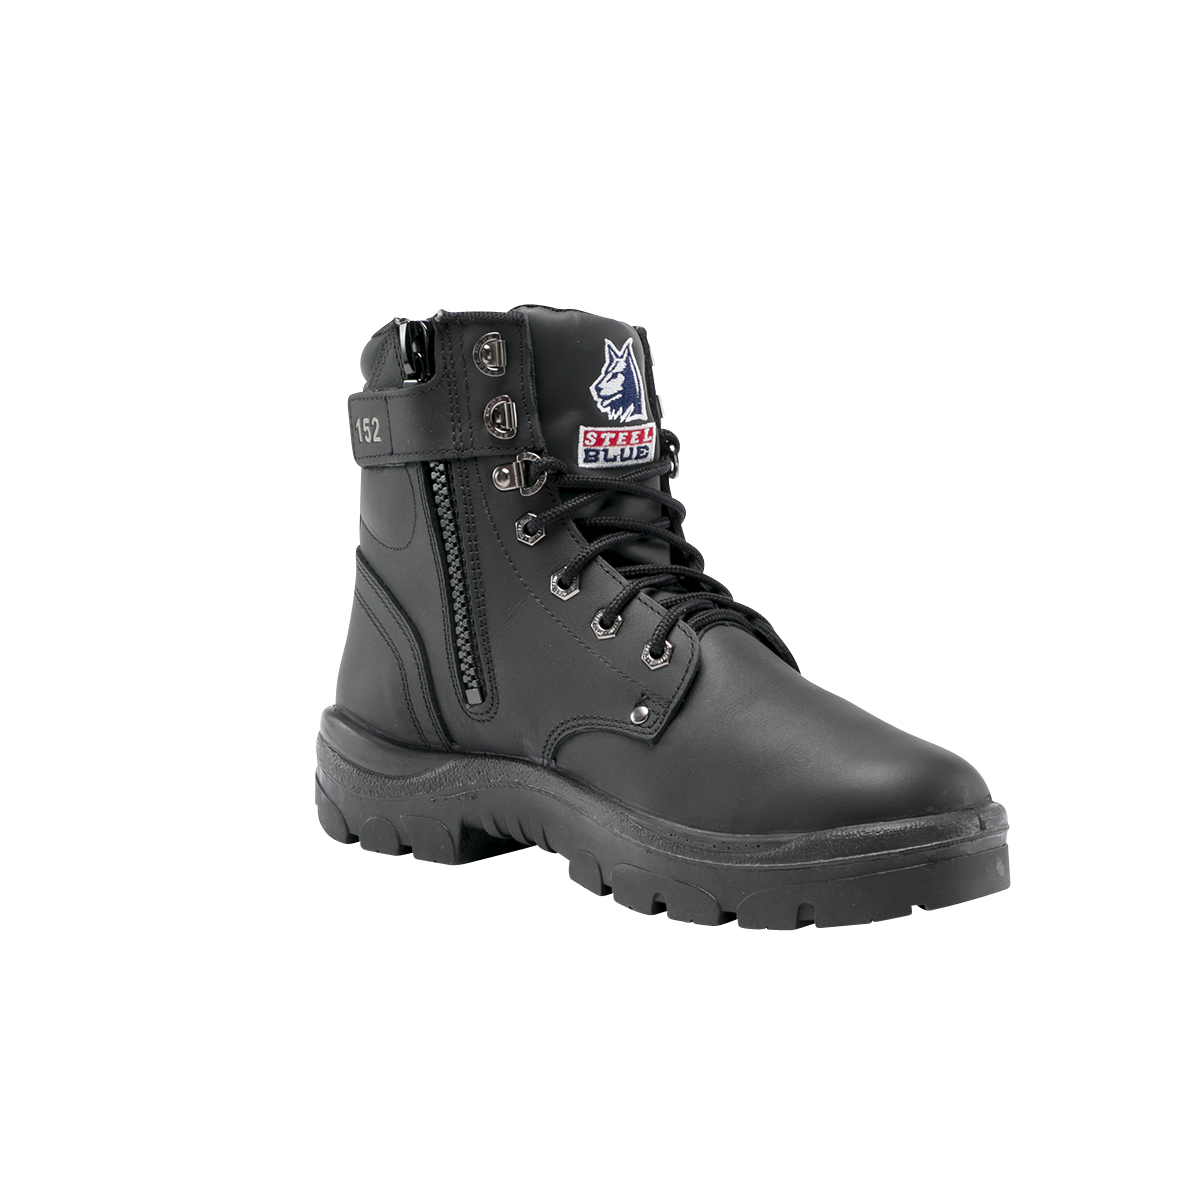 SAFETY BOOT ARGYLE LACE & ZIP S10 -ANKLE BLACK